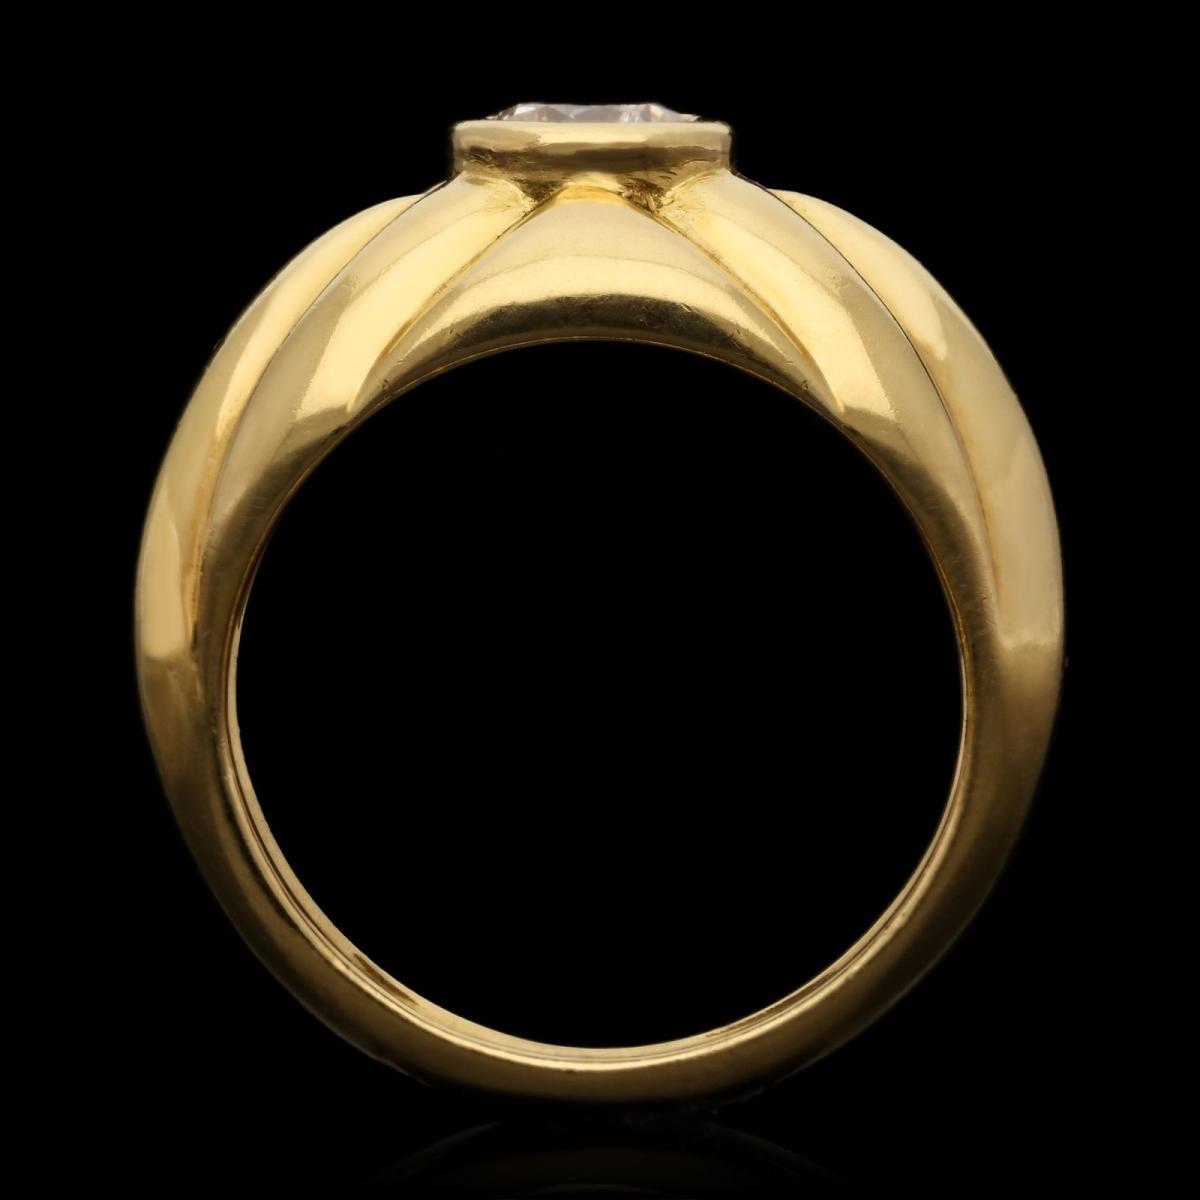 18ct gold and diamond ring by Van Cleef & Arpels